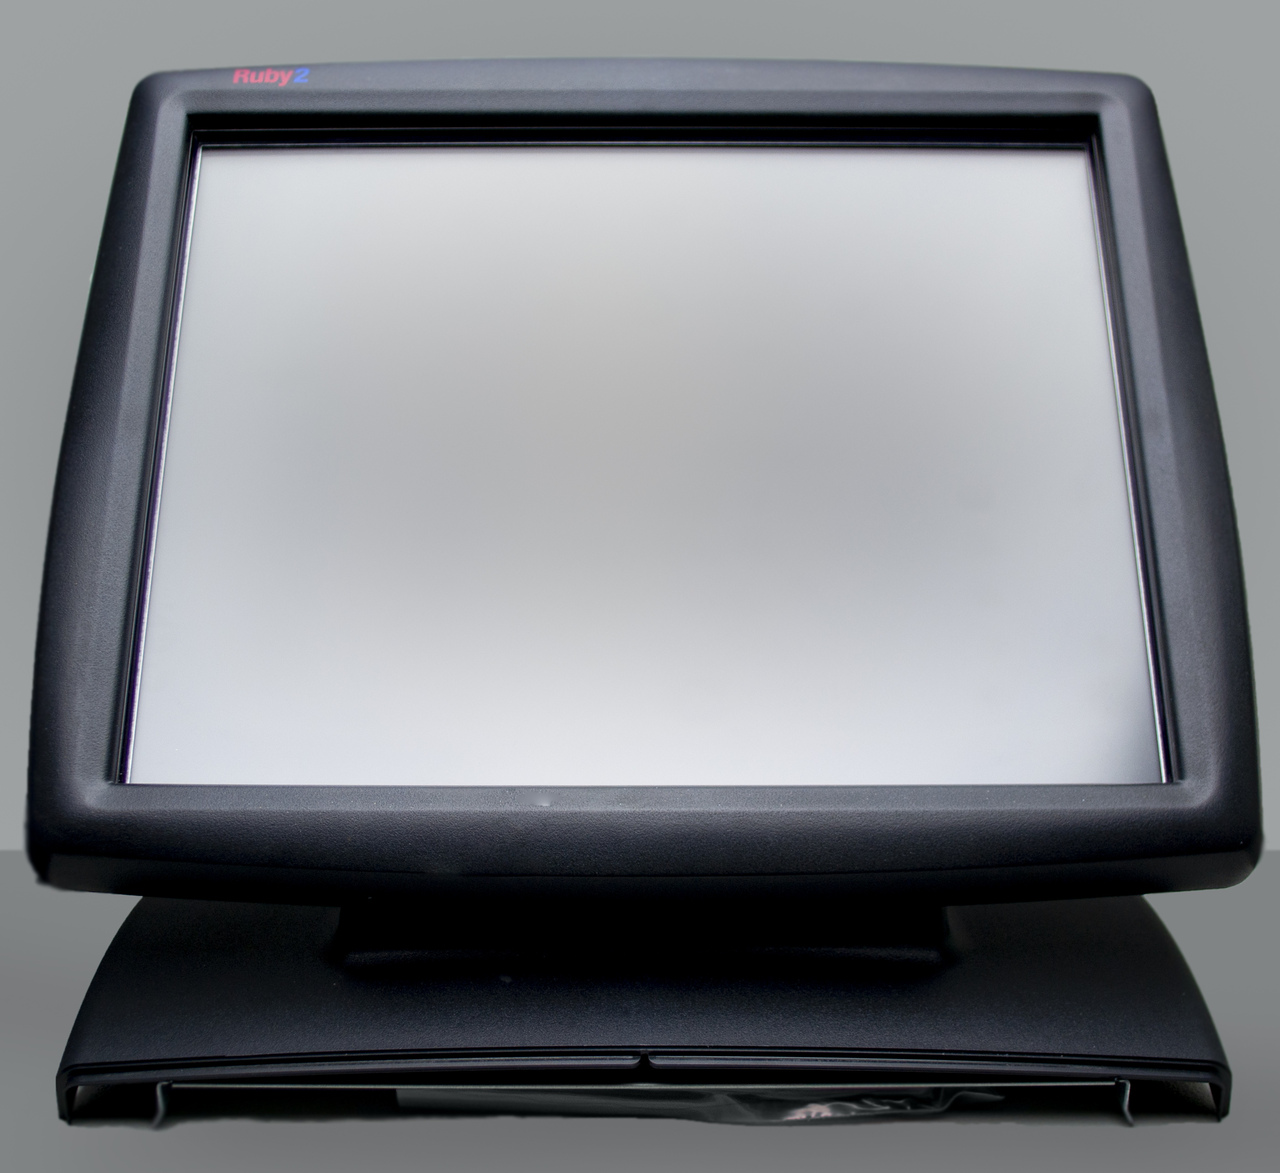 RUBY 2 TOP ASSEMBLY WITH TOUCH SCREEN, Fits Verifone Image